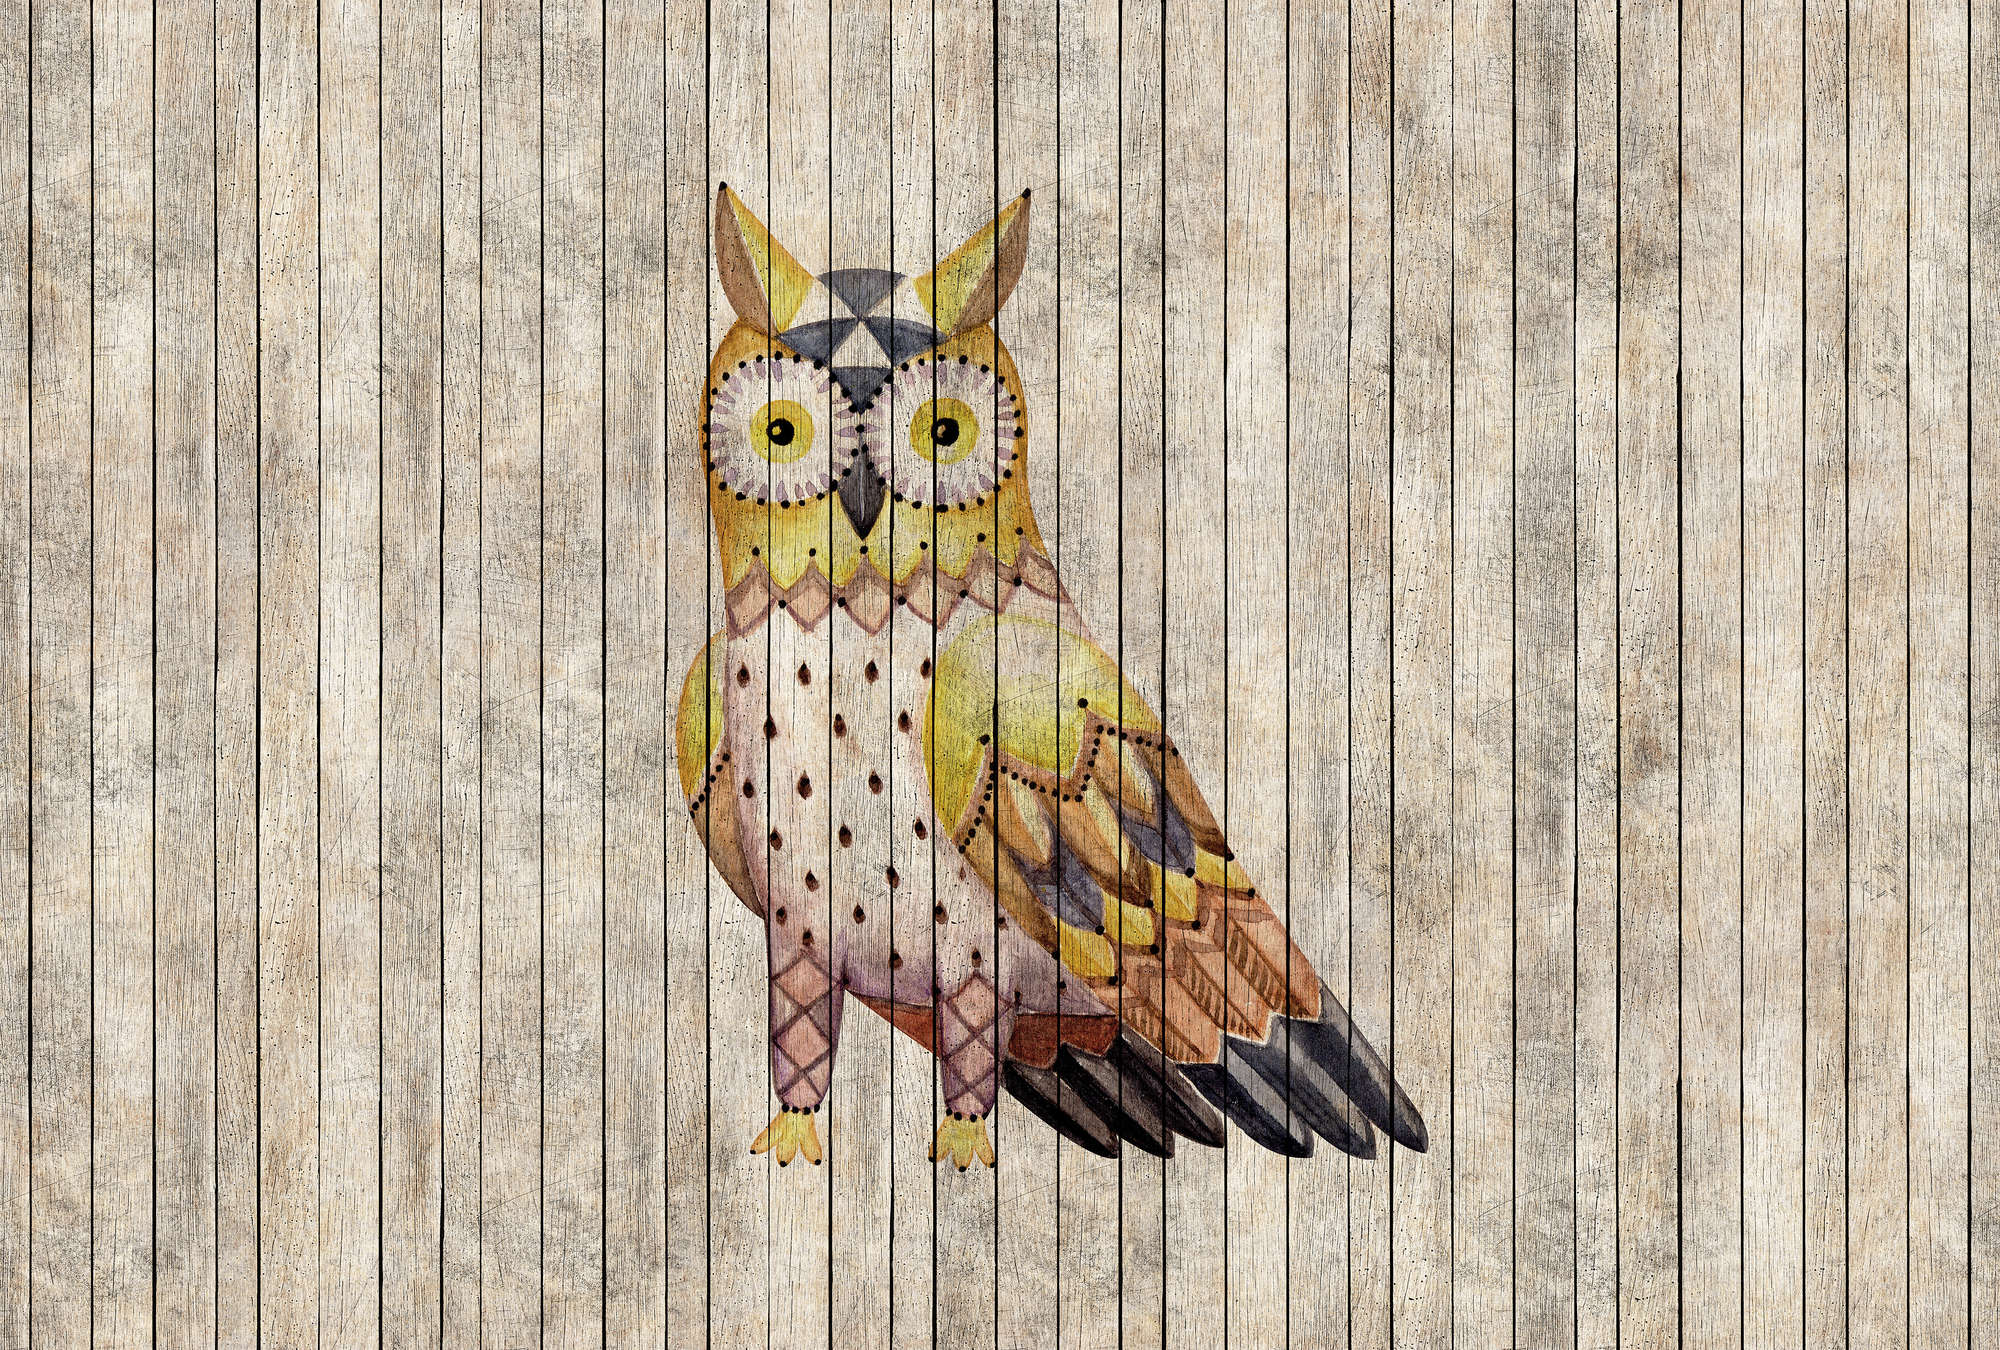             Fairy tale 1 - Wooden board wall with owl photo wallpaper - Beige, Brown | Premium smooth fleece
        